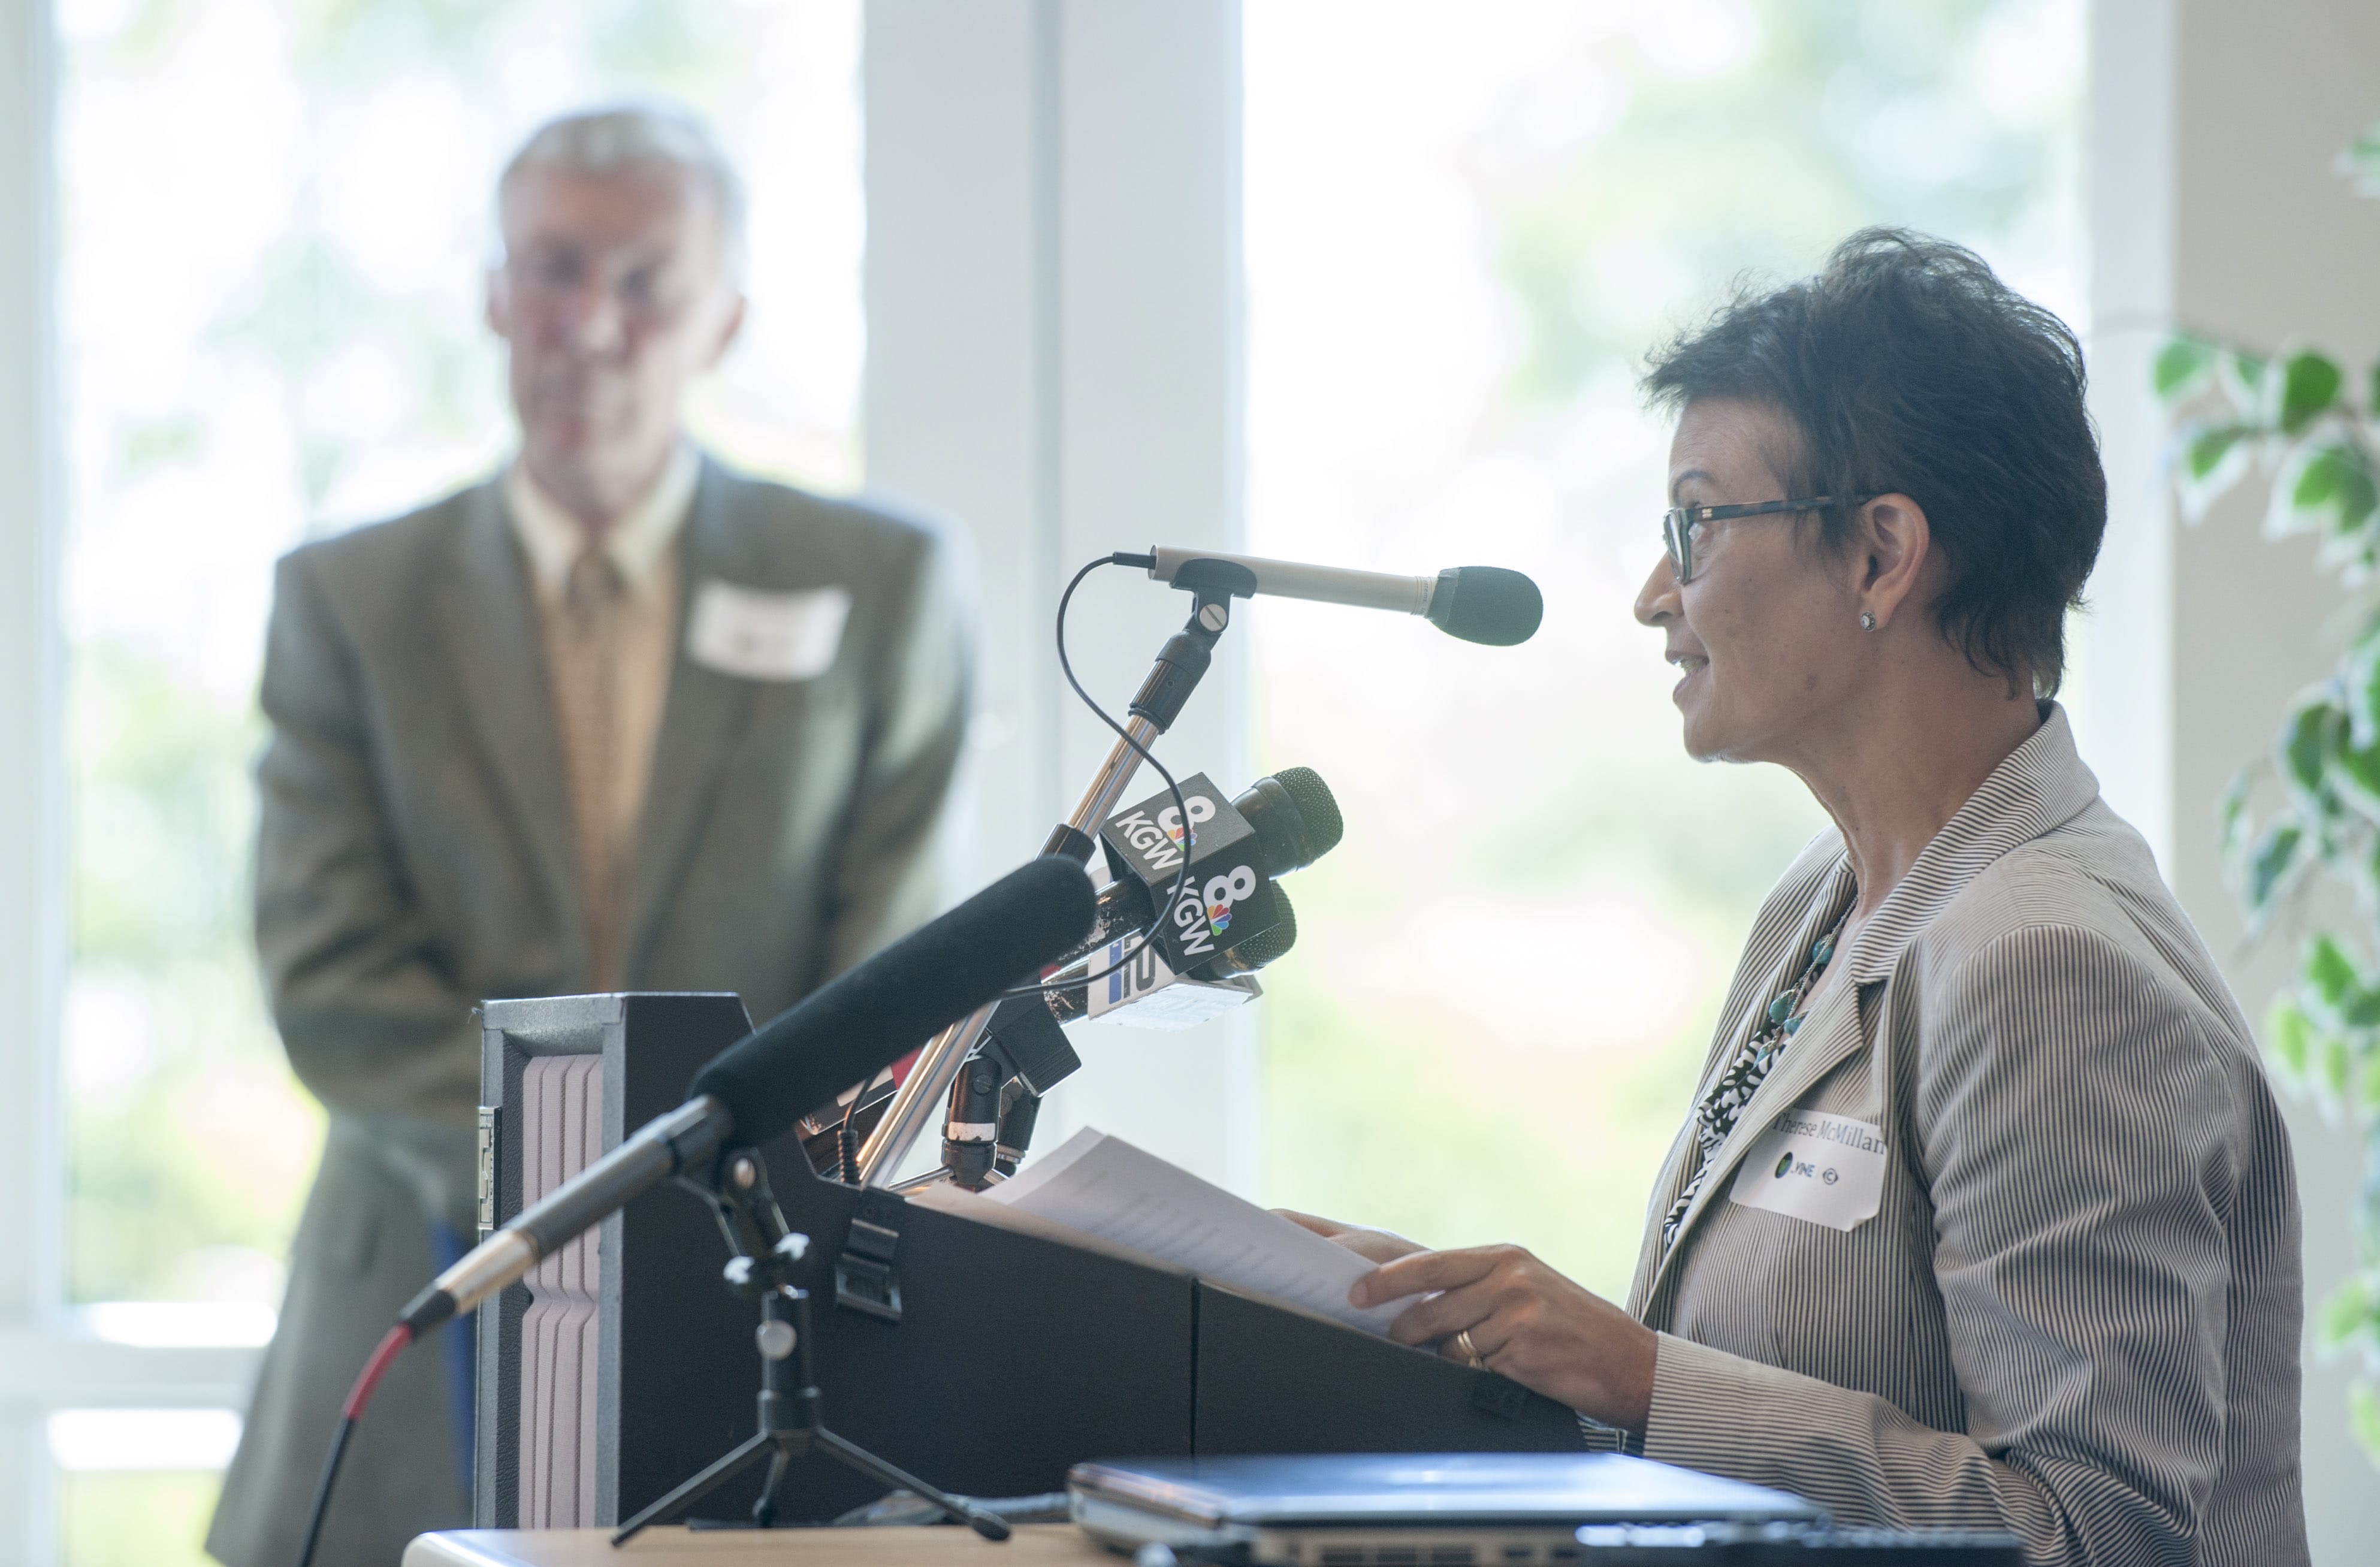 FTA Administrator Therese McMillan speaks as C-Tran CEO Jeff Hamm listens in the background, at an event at Clark College in Vancouver, Thursday September 10, 2015. McMillan officially announced a $38.5 million grant award for C-Tran's bus rapid transit project known as The Vine.